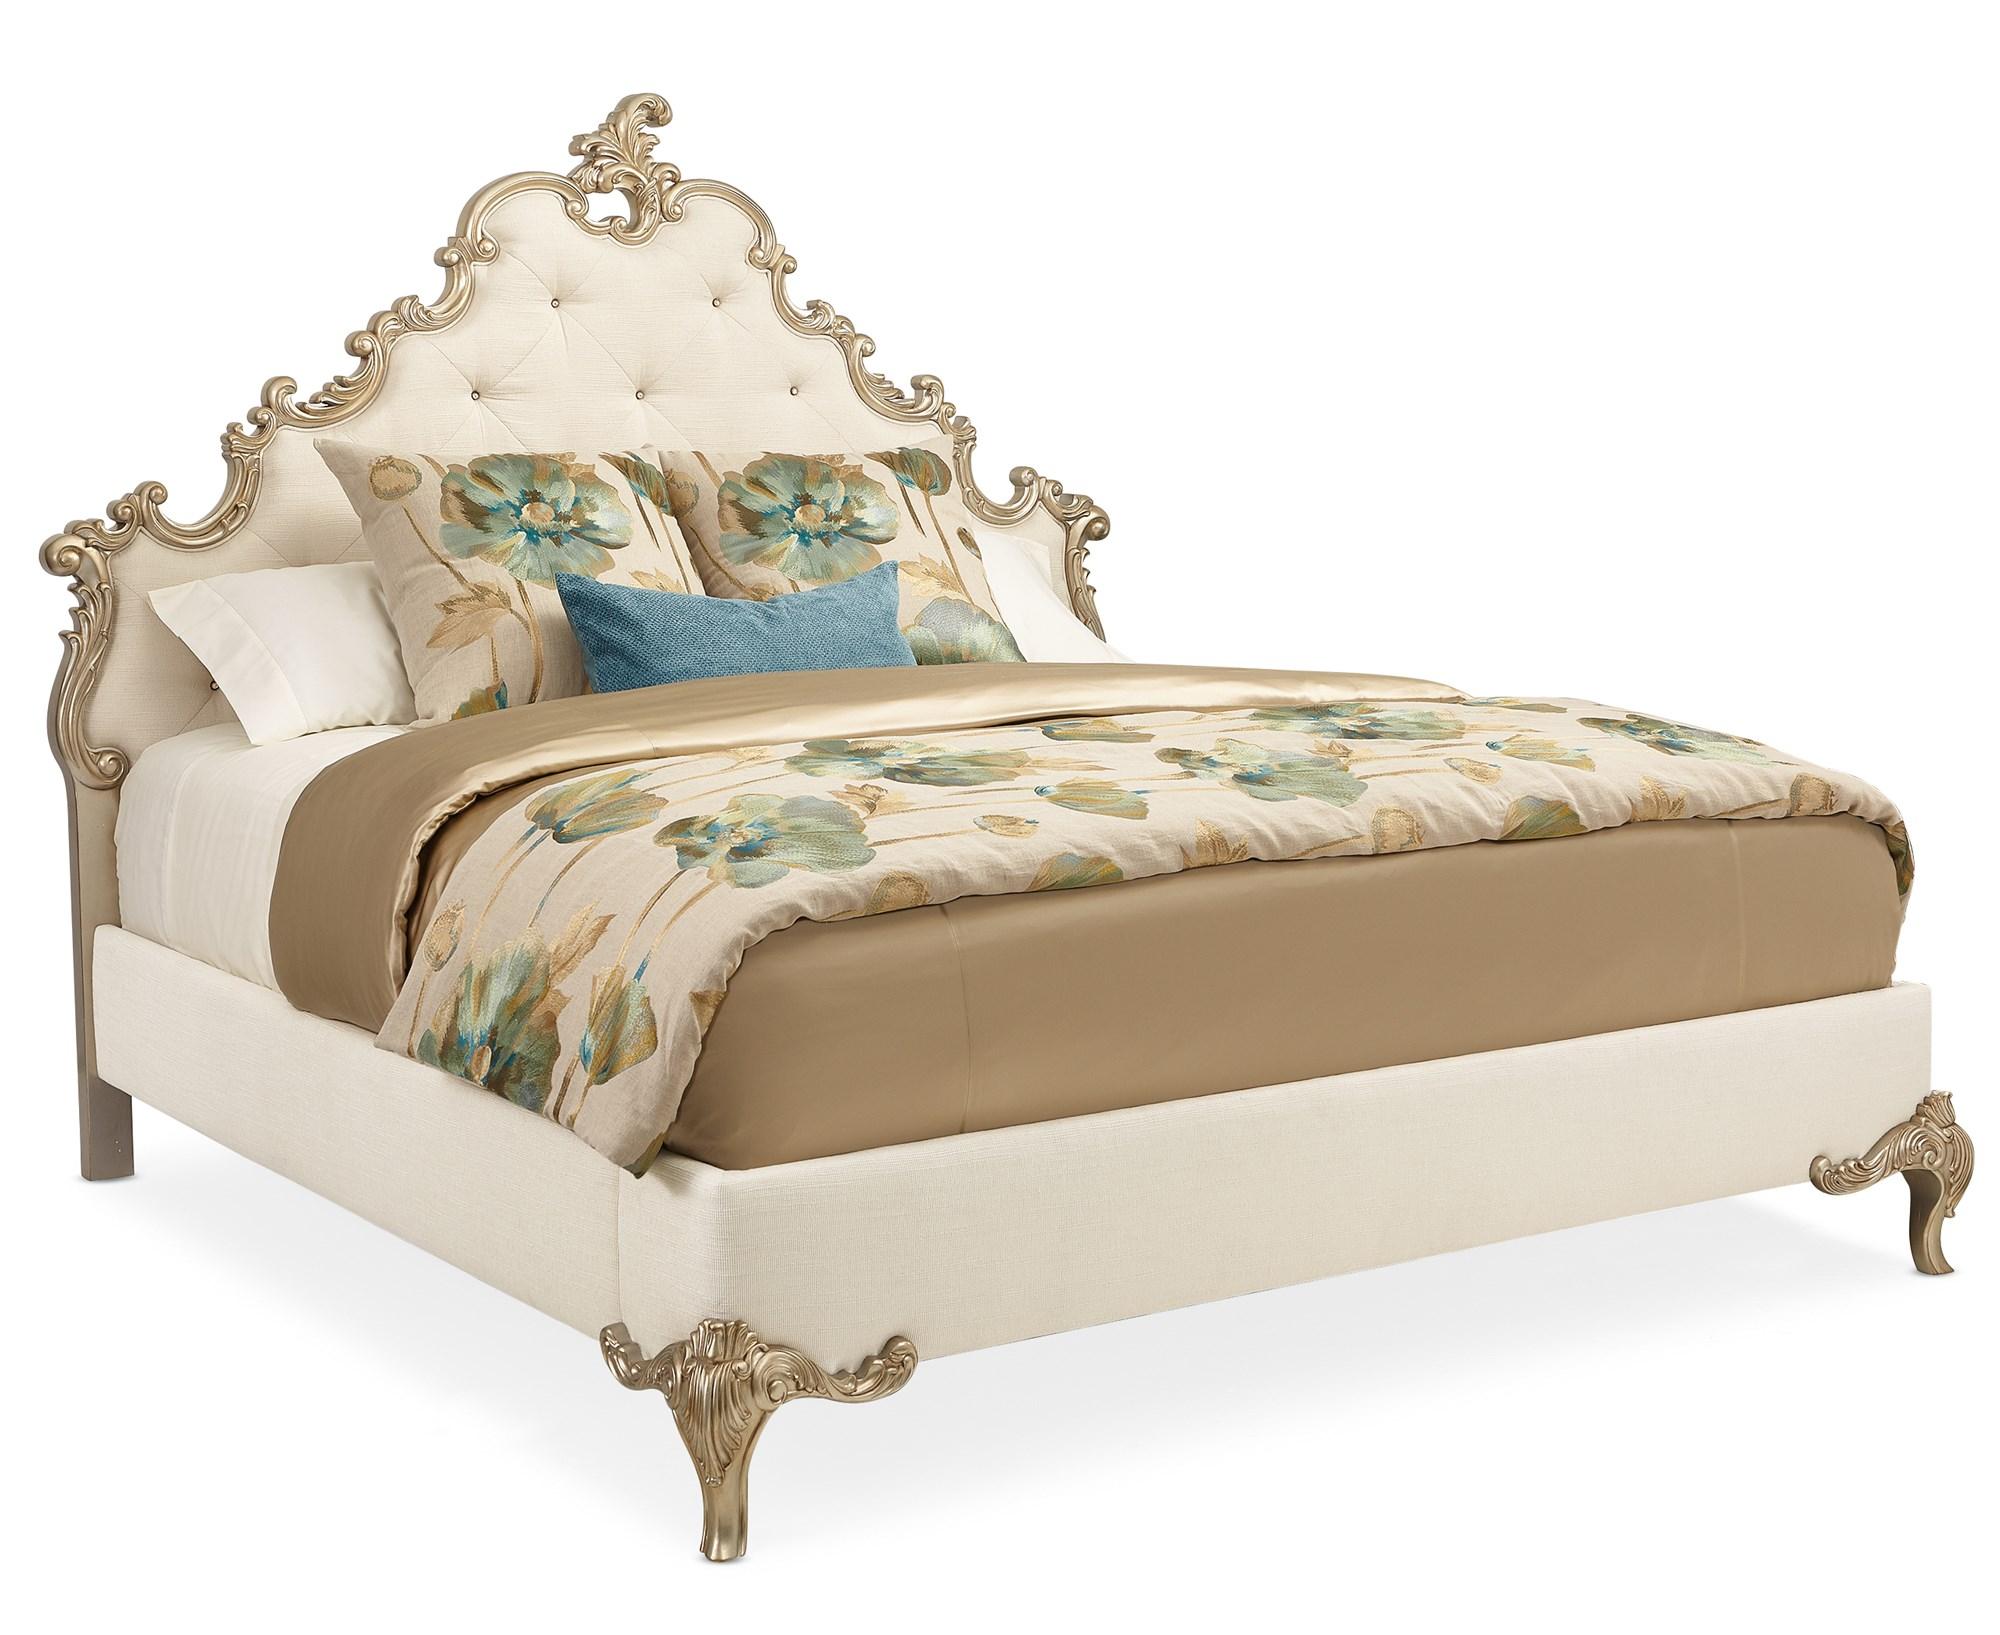 Traditional Panel Bed FONTAINEBLEAU C063-419-141 in Cream, Gold Fabric